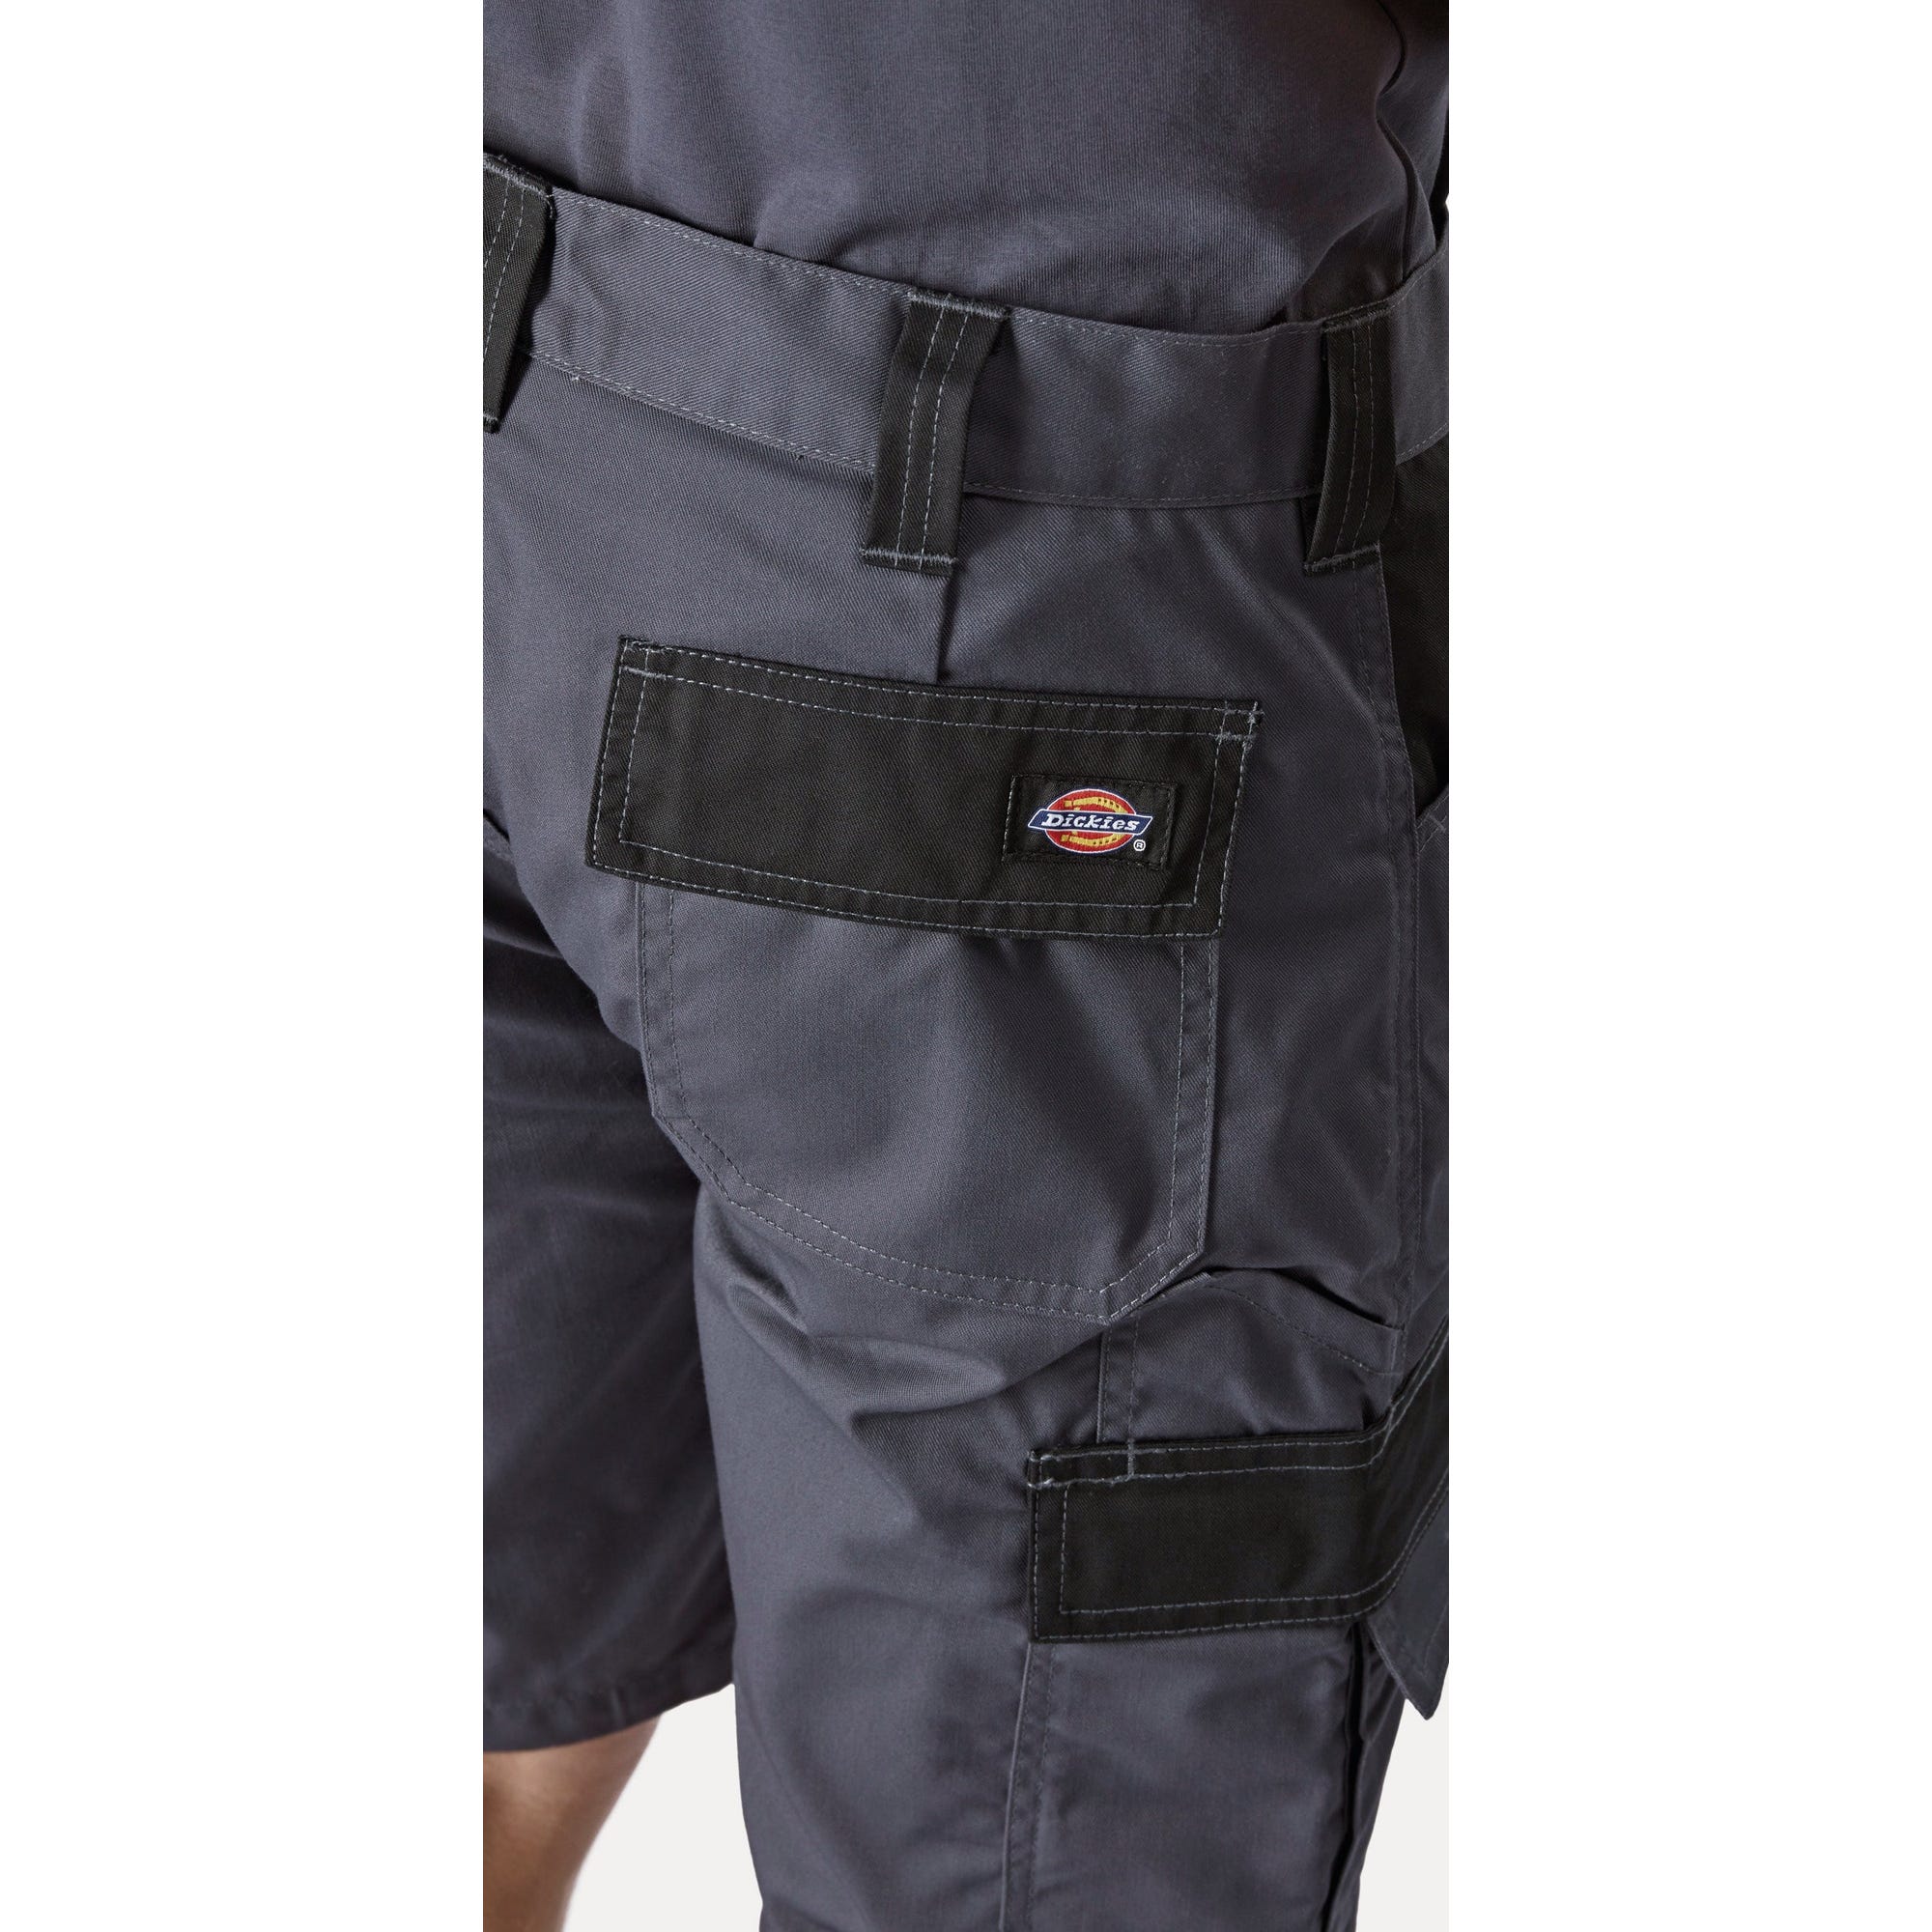 Short Everyday Noir - Dickies - Taille 42 8